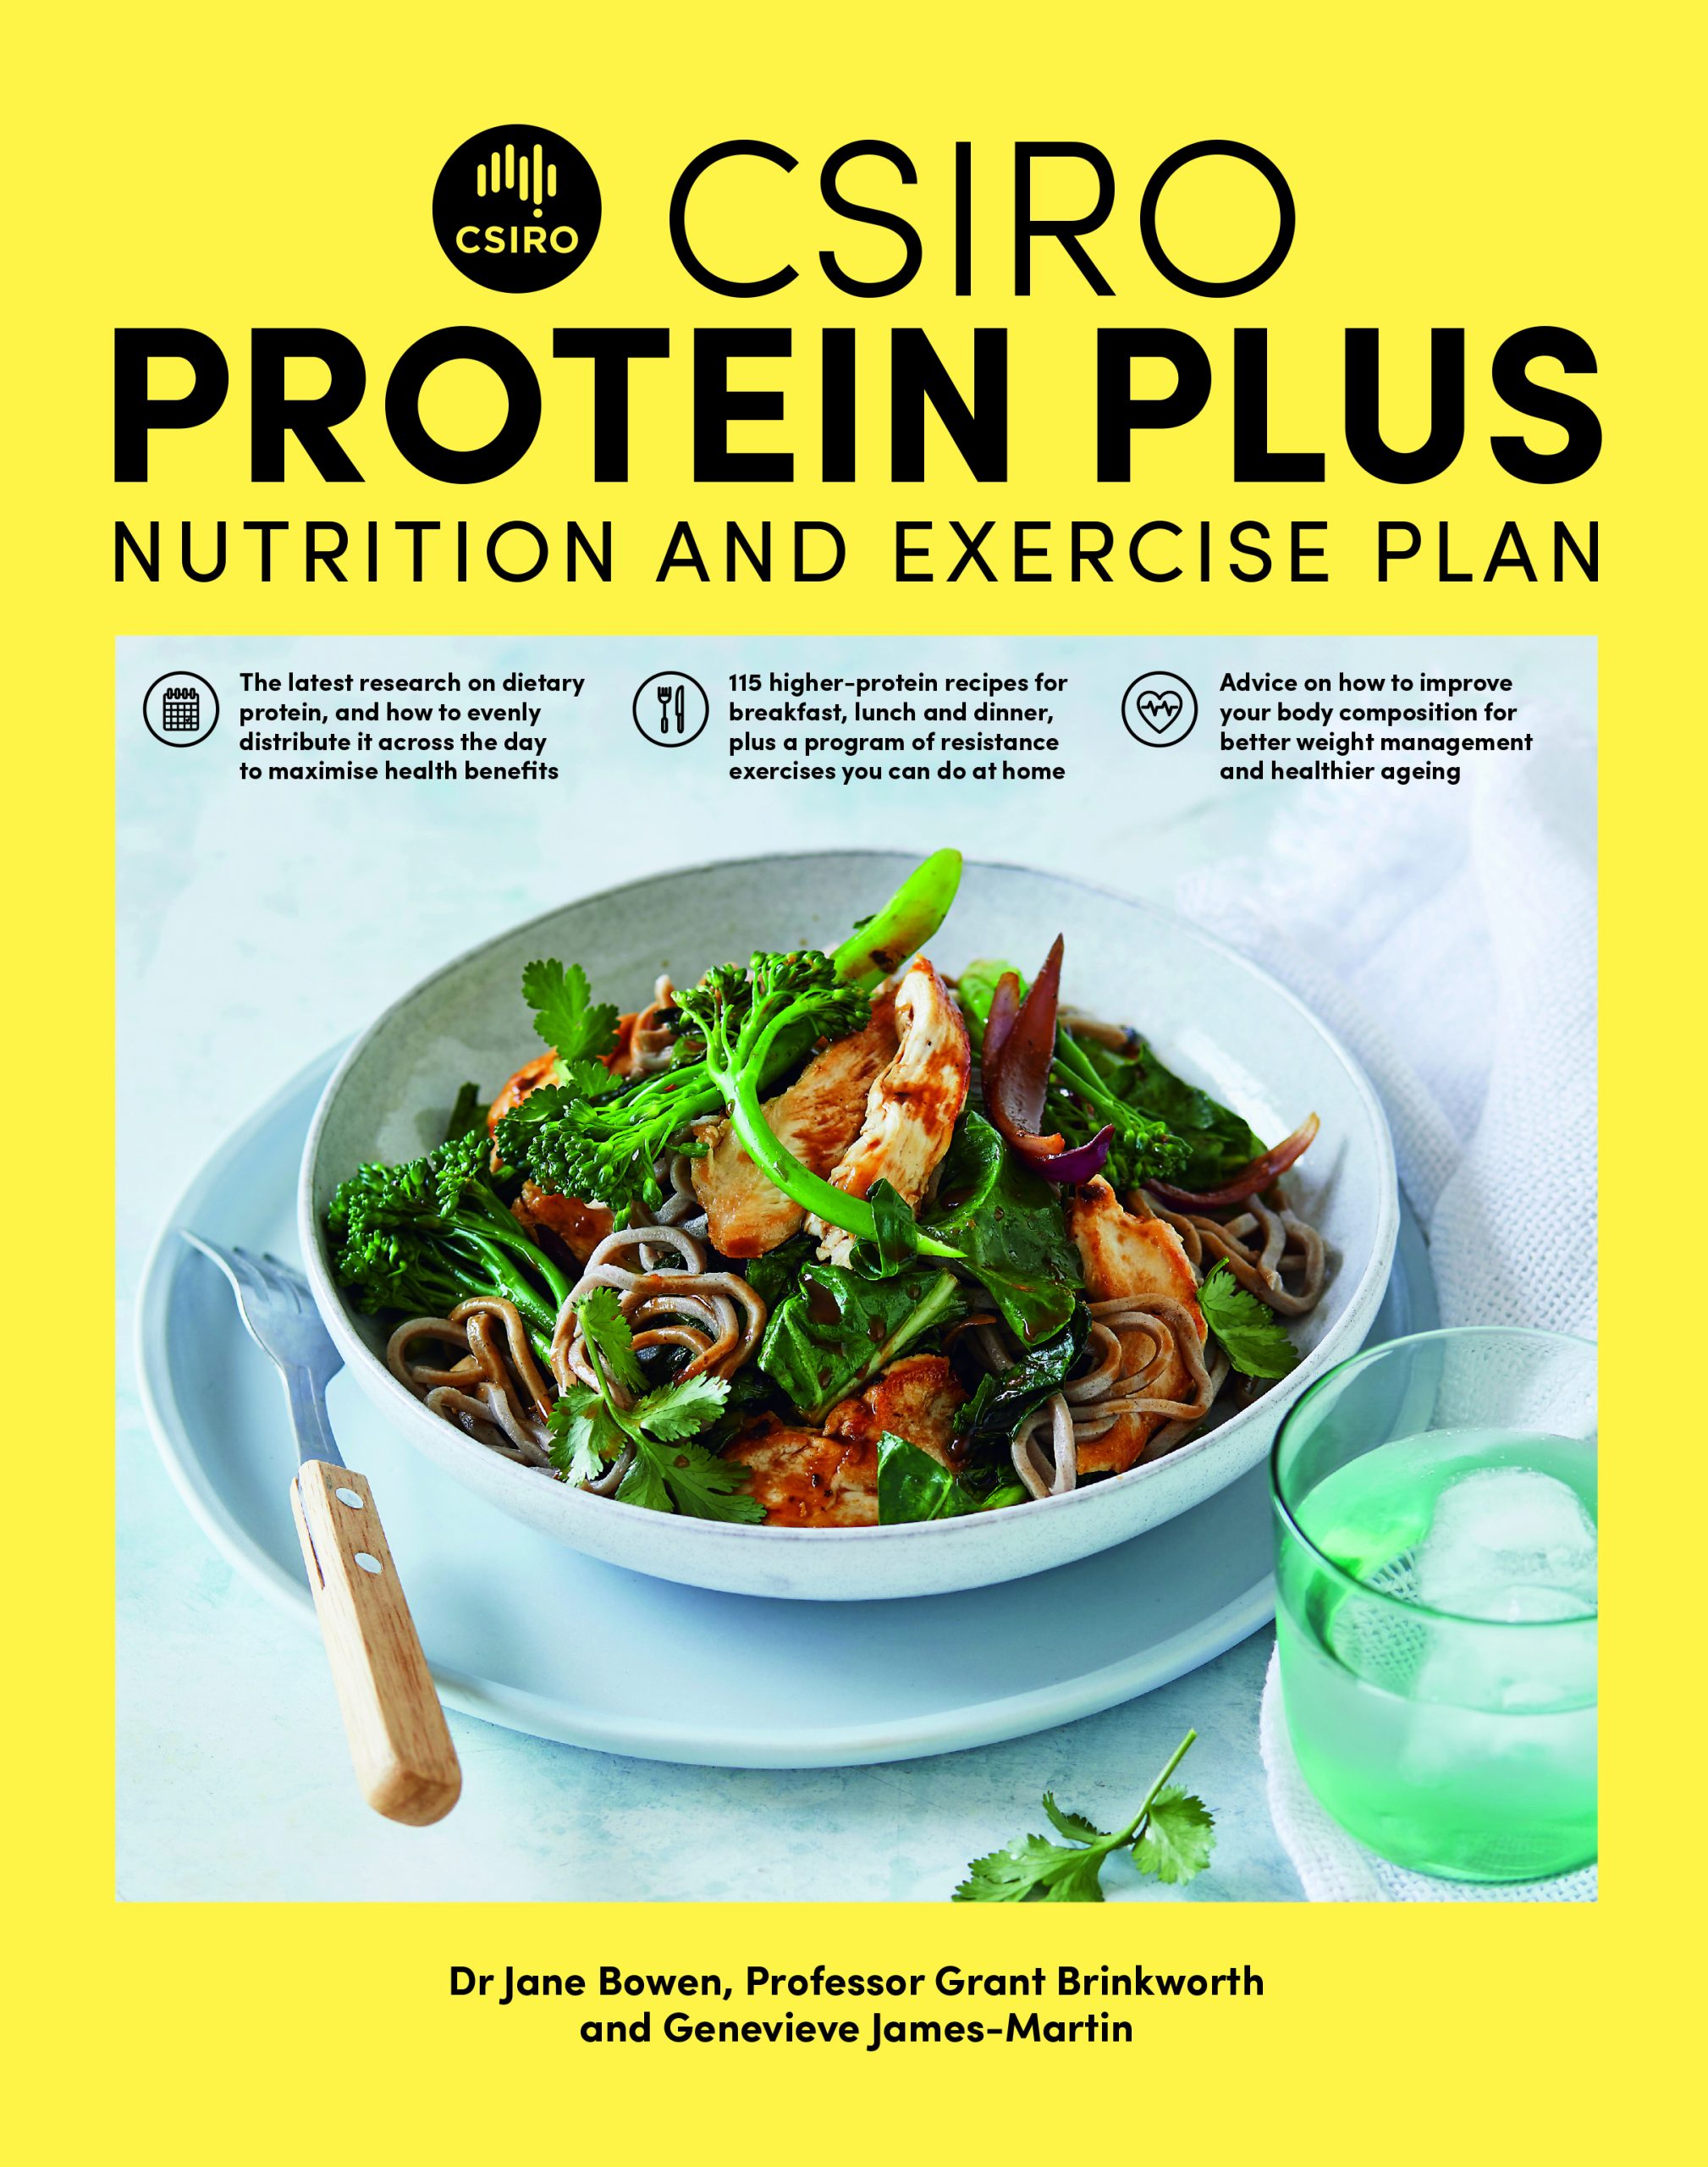 Recipes extracted from CSIRO Protein Plus by Professor Grant Brinkworth, Dr Jane Bowen and Genevieve James-Martin. Available now, Macmillan Australia, RRP $34.99.